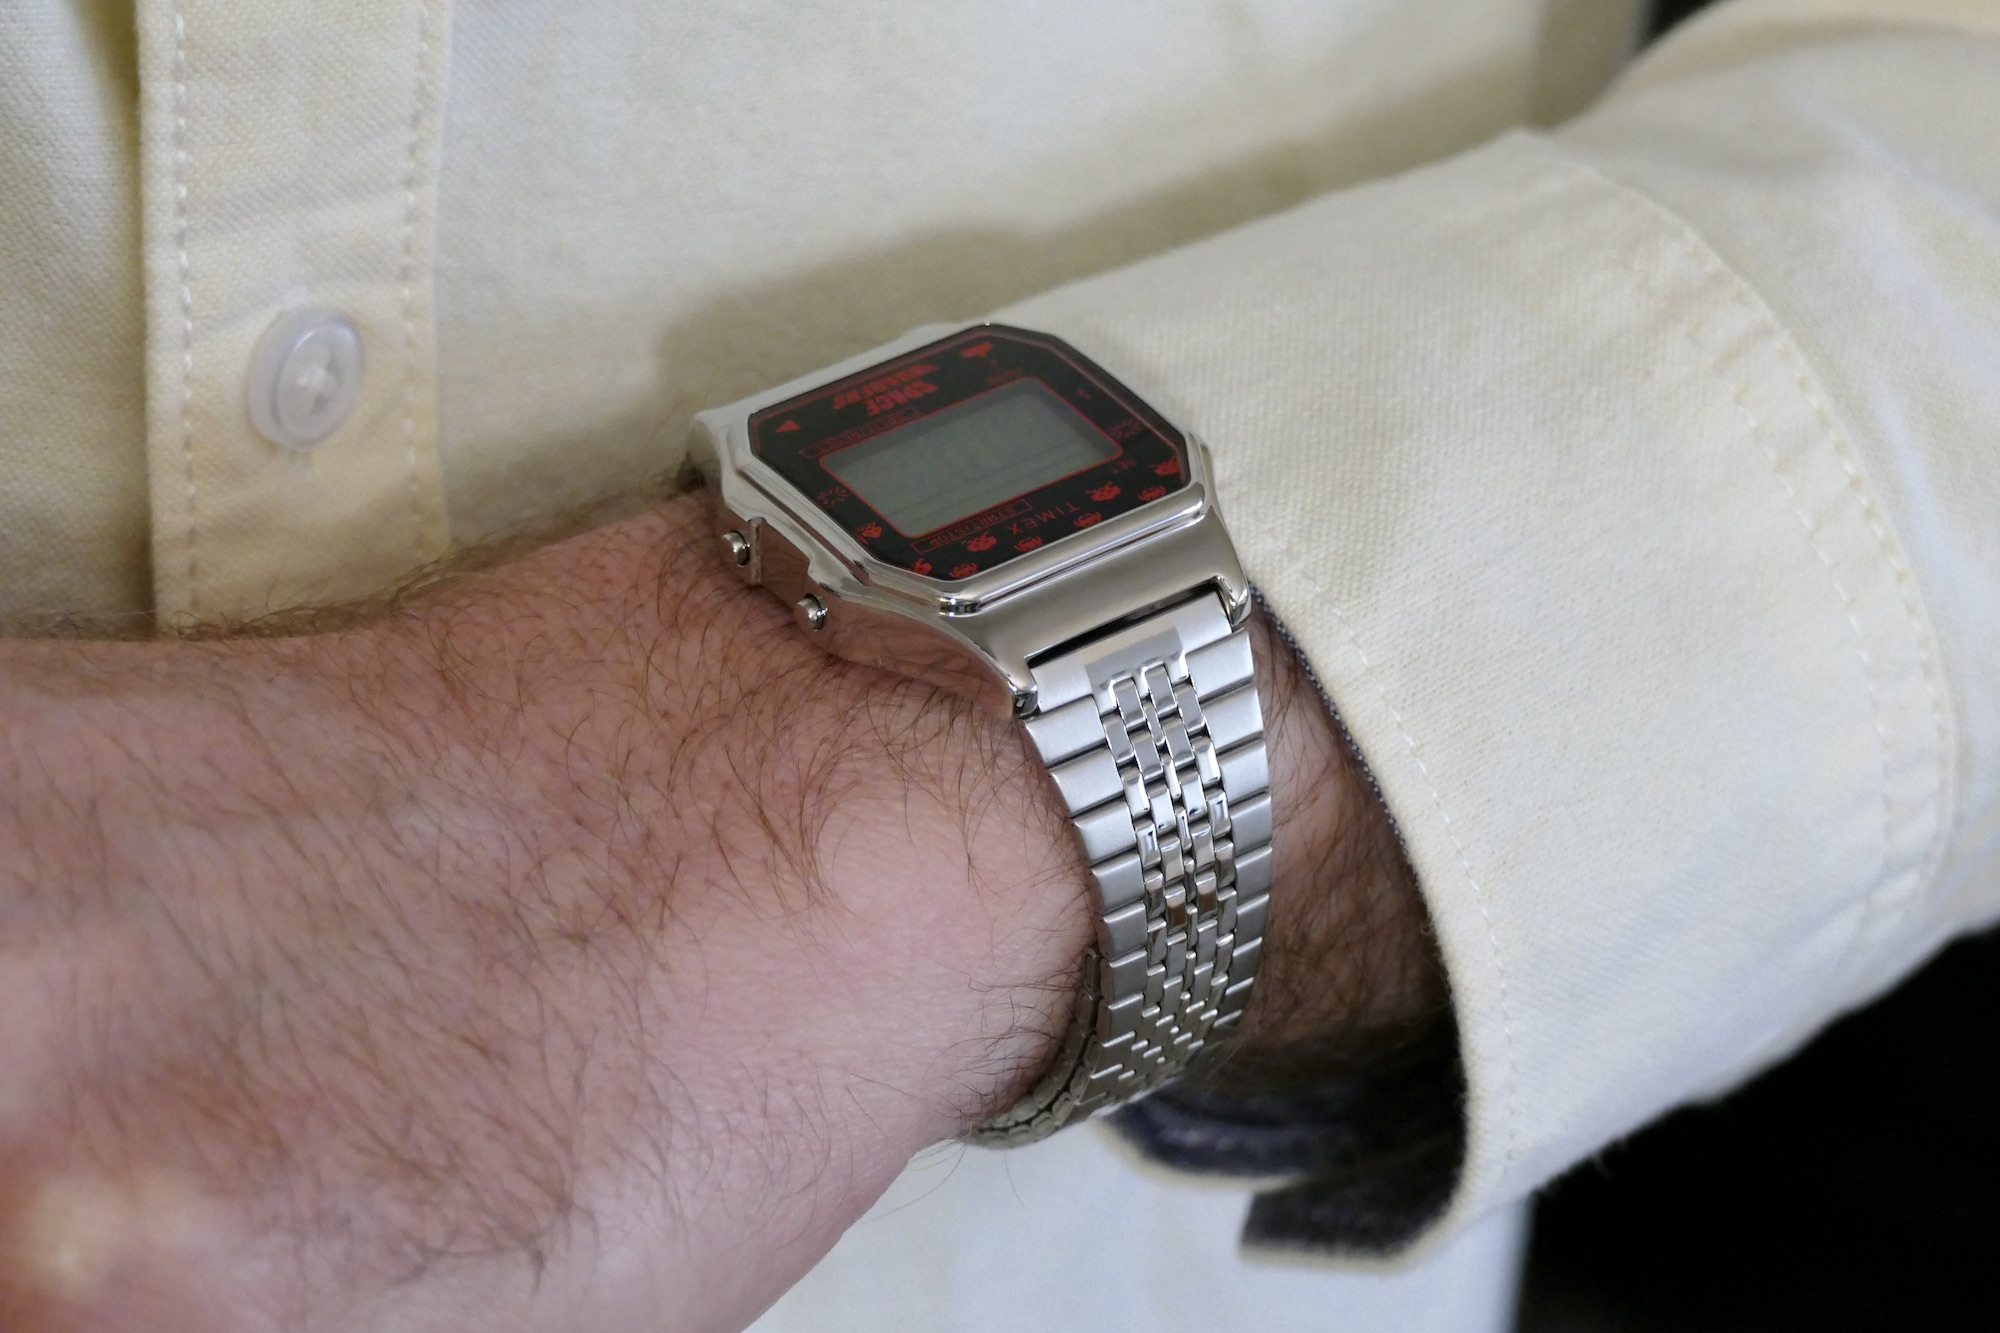 Timex T80 Space Invaders on the wrist.